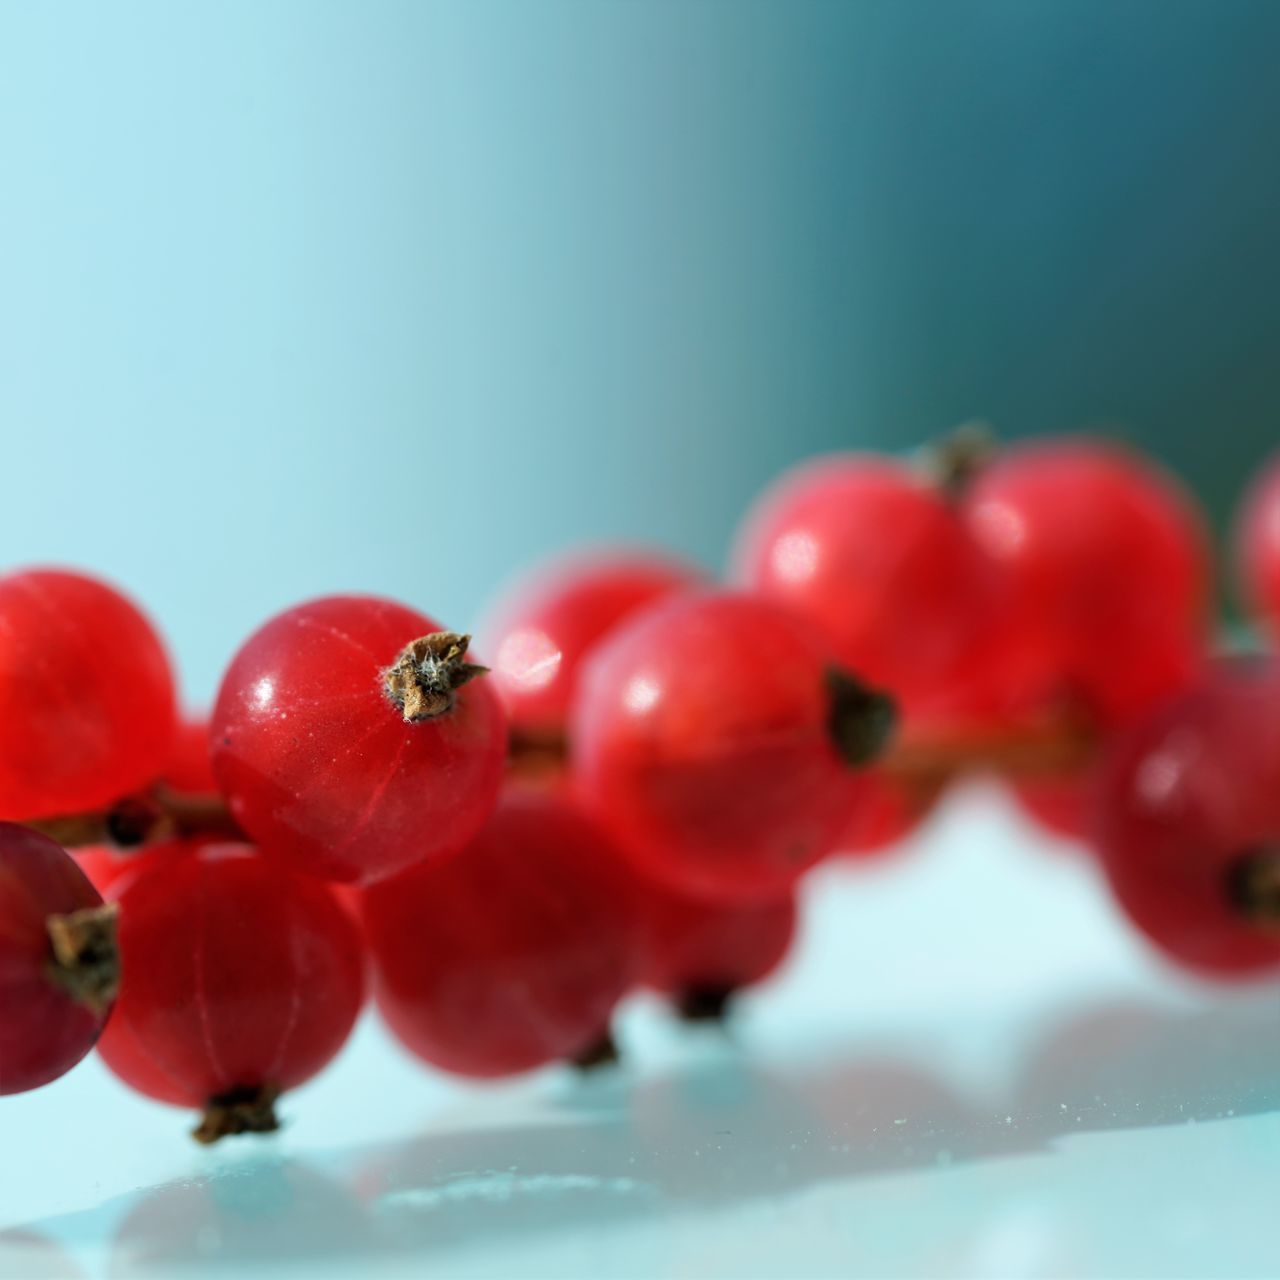 CLOSE-UP OF RED BERRIES GROWING ON BLUE TABLE